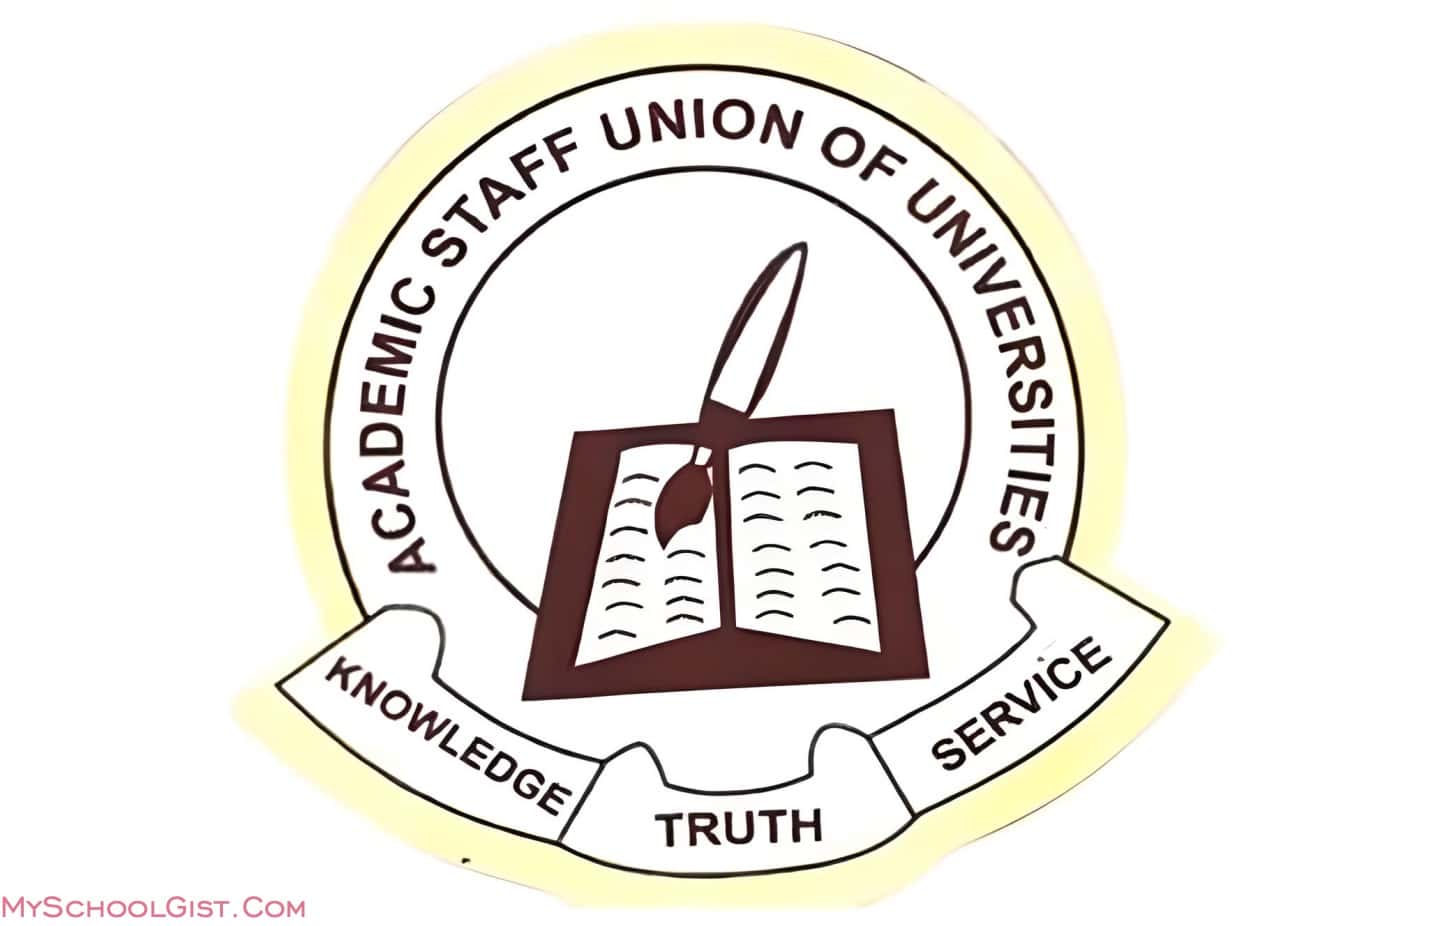 ASUU Demands More Funds for Education